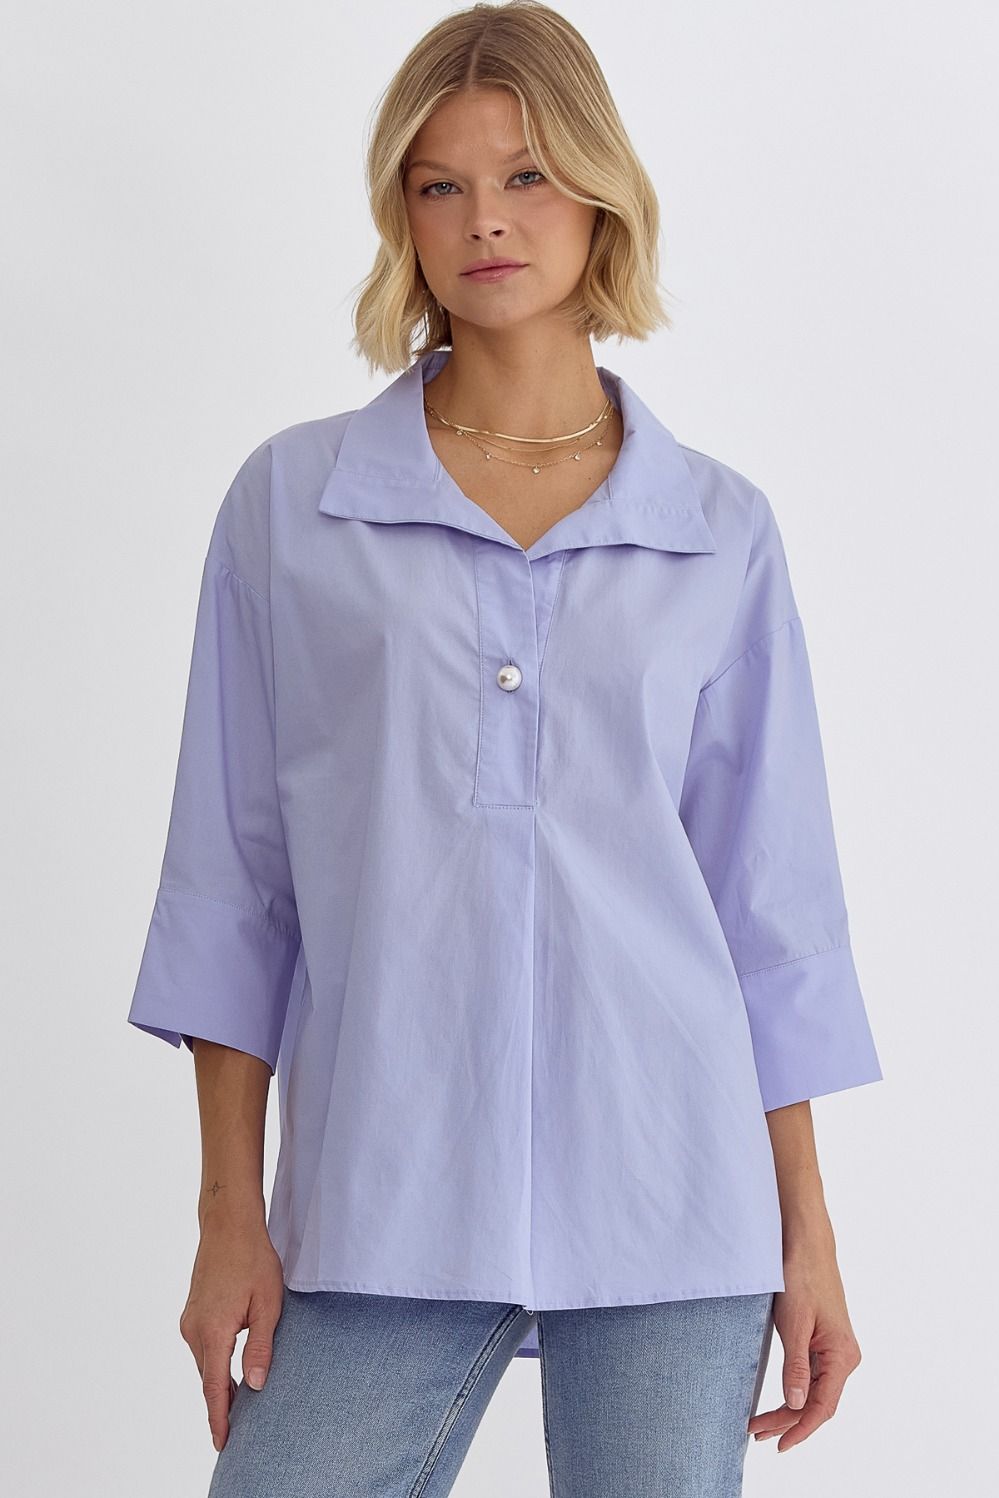 Solid Collared 3/4 Slv Top